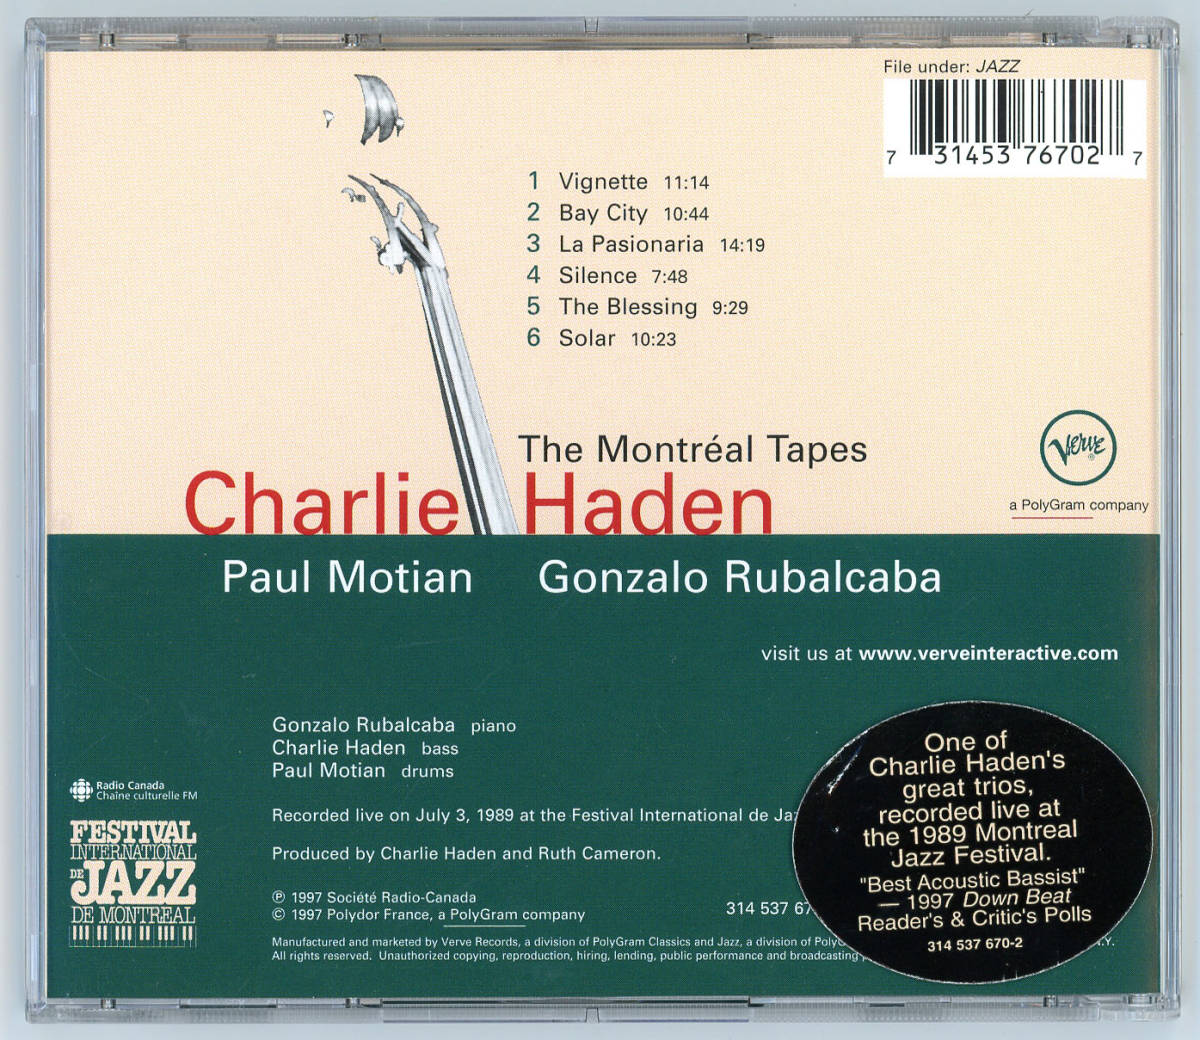 Charlie Haden, Paul Motian, Gonzalo Rubalcaba - The Montreal Tapes, 輸入盤 (Verve)の画像2